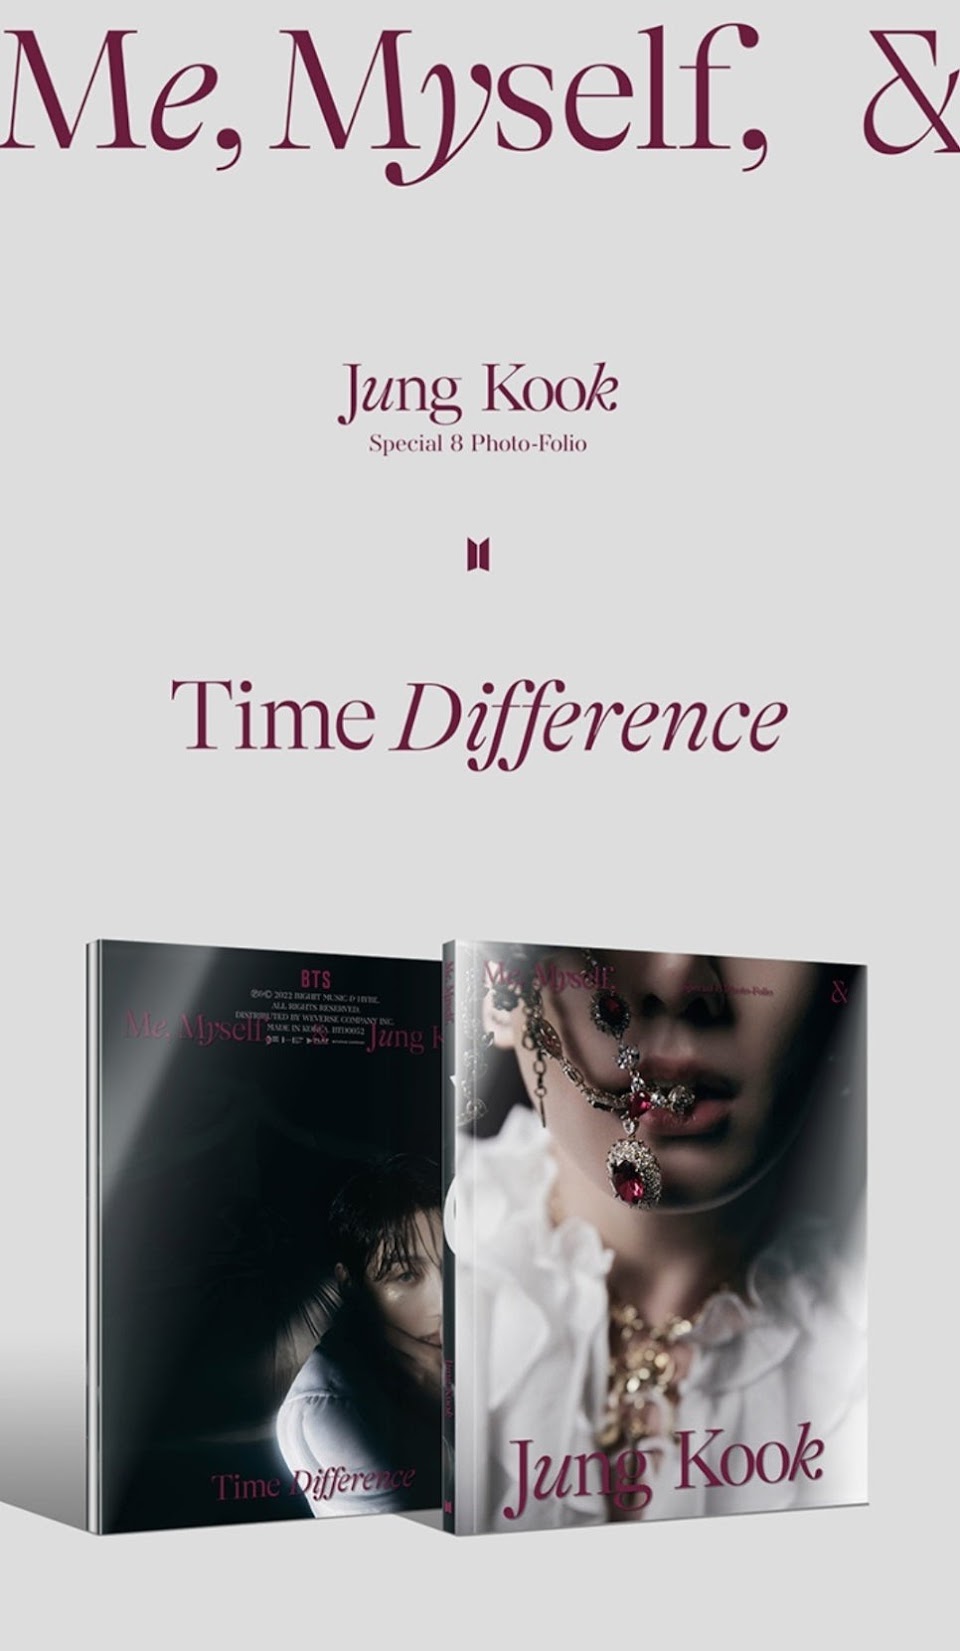 pr-weverse-shop-photo-book-jung-kook-special-8-photo-folio-me-myself-and-jung-kook-time-difference-30333266100304_1200x